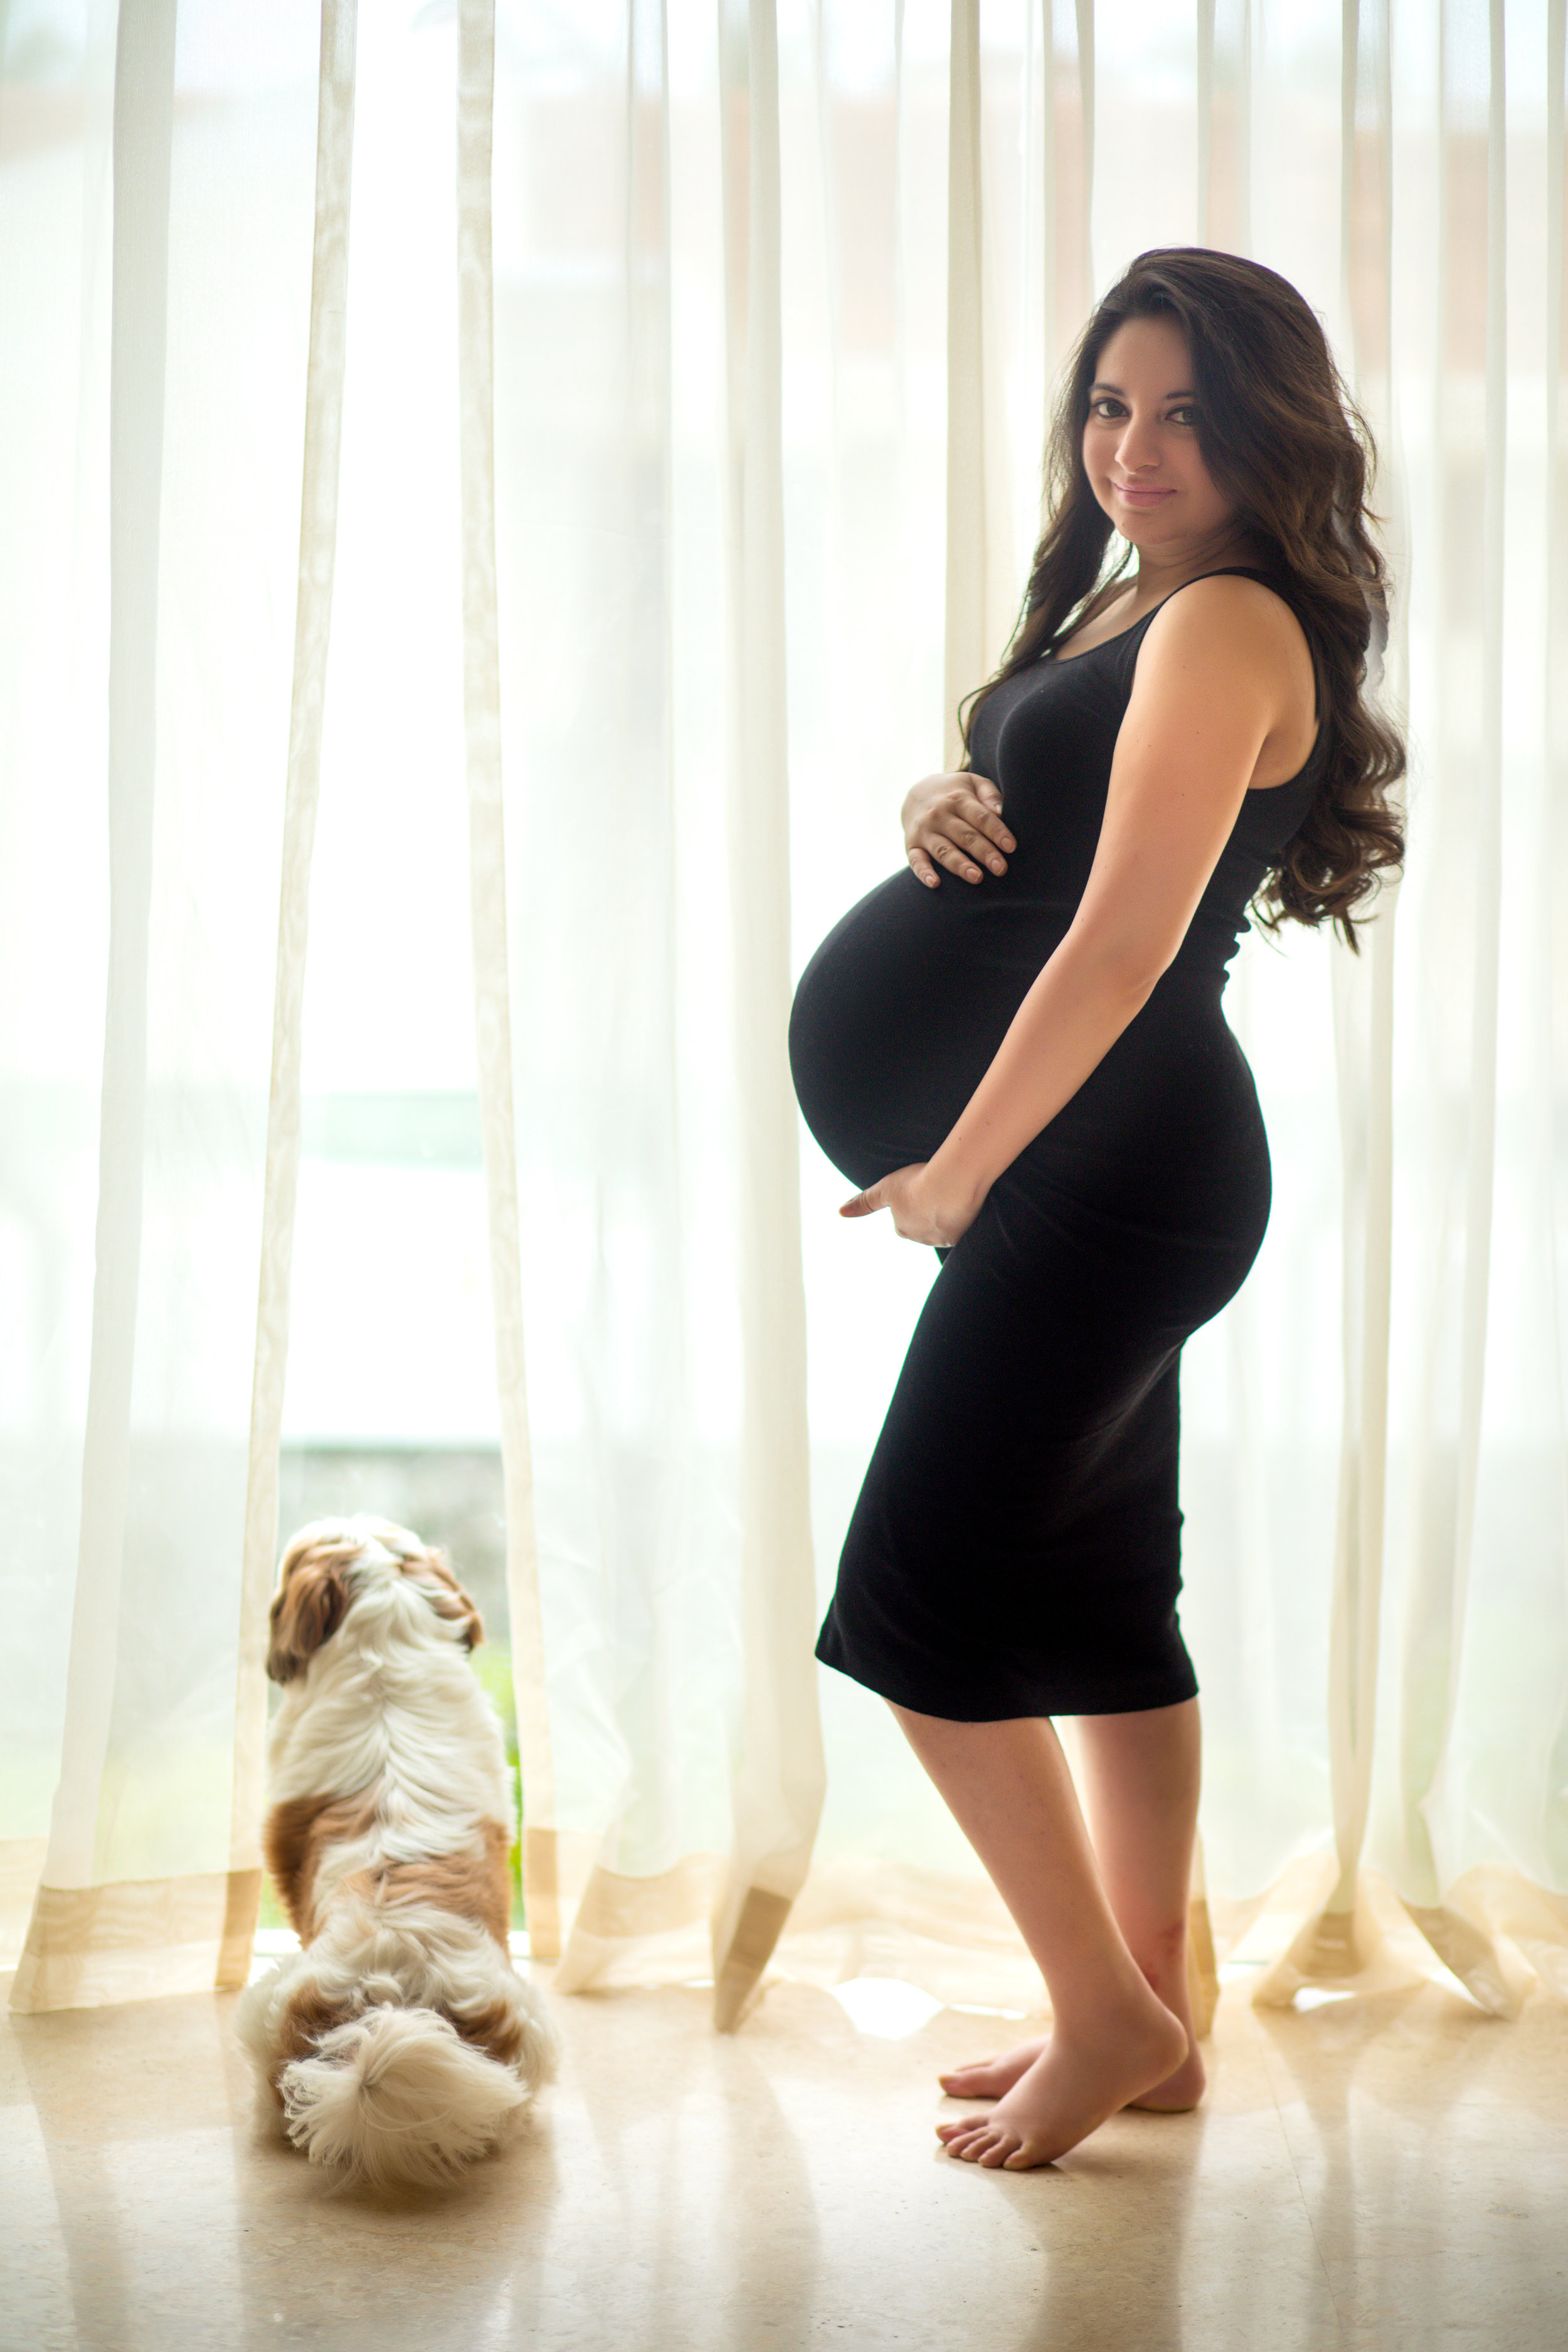 Mommy to be in black dress in a maternity photoshoot with her shih tzu looking out of the window | Indian Maternity Photoshoot Ideas | Adorable maternity photo shoot ideas with pets for cute pictures | Cute Pregnancy Photoshoot with Dogs for expecting couples | Function Mania